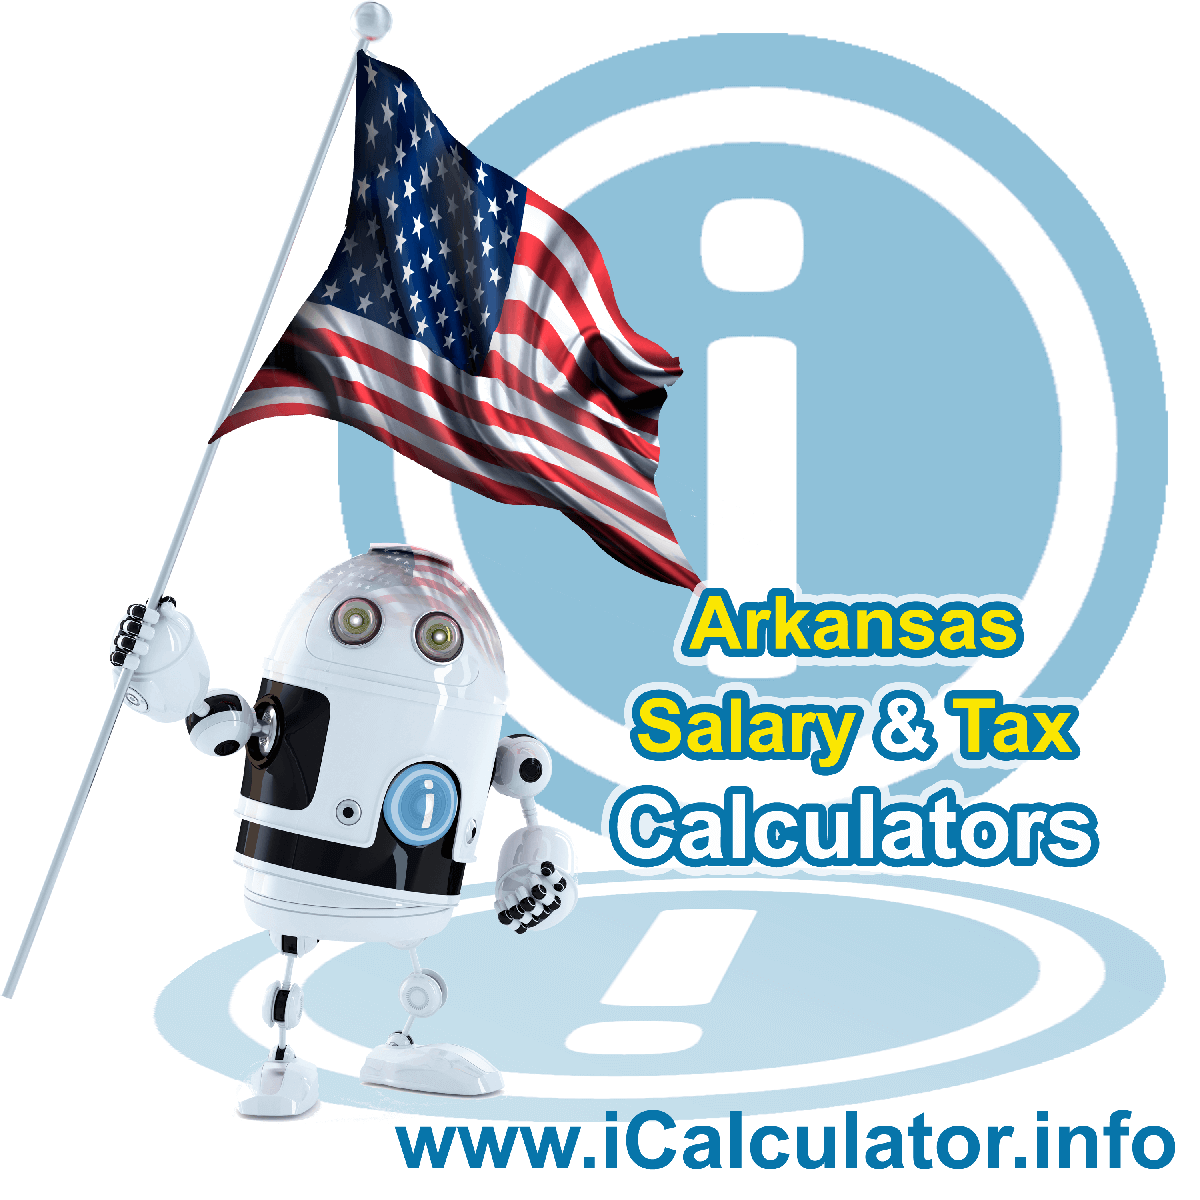 Arkansas Salary Calculator 2023 | iCalculator™ | The Arkansas Salary Calculator allows you to quickly calculate your salary after tax including Arkansas State Tax, Federal State Tax, Medicare Deductions, Social Security, Capital Gains and other income tax and salary deductions complete with supporting Arkansas state tax tables 